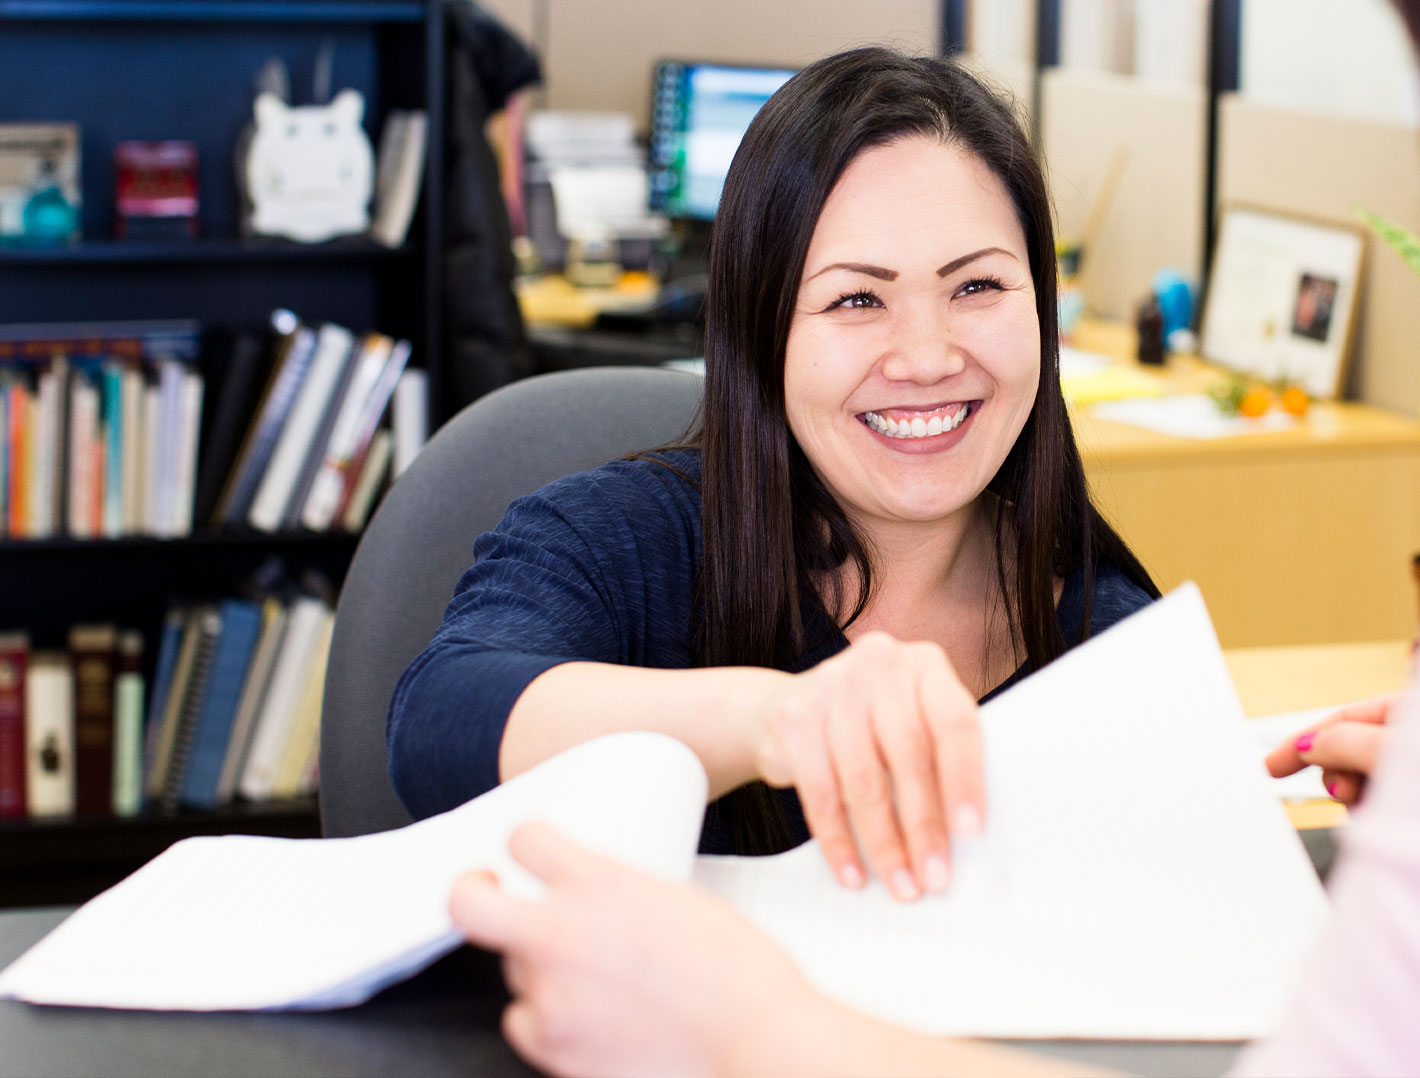 Smiling woman sitting at a help desk flipping through a stack of paper.